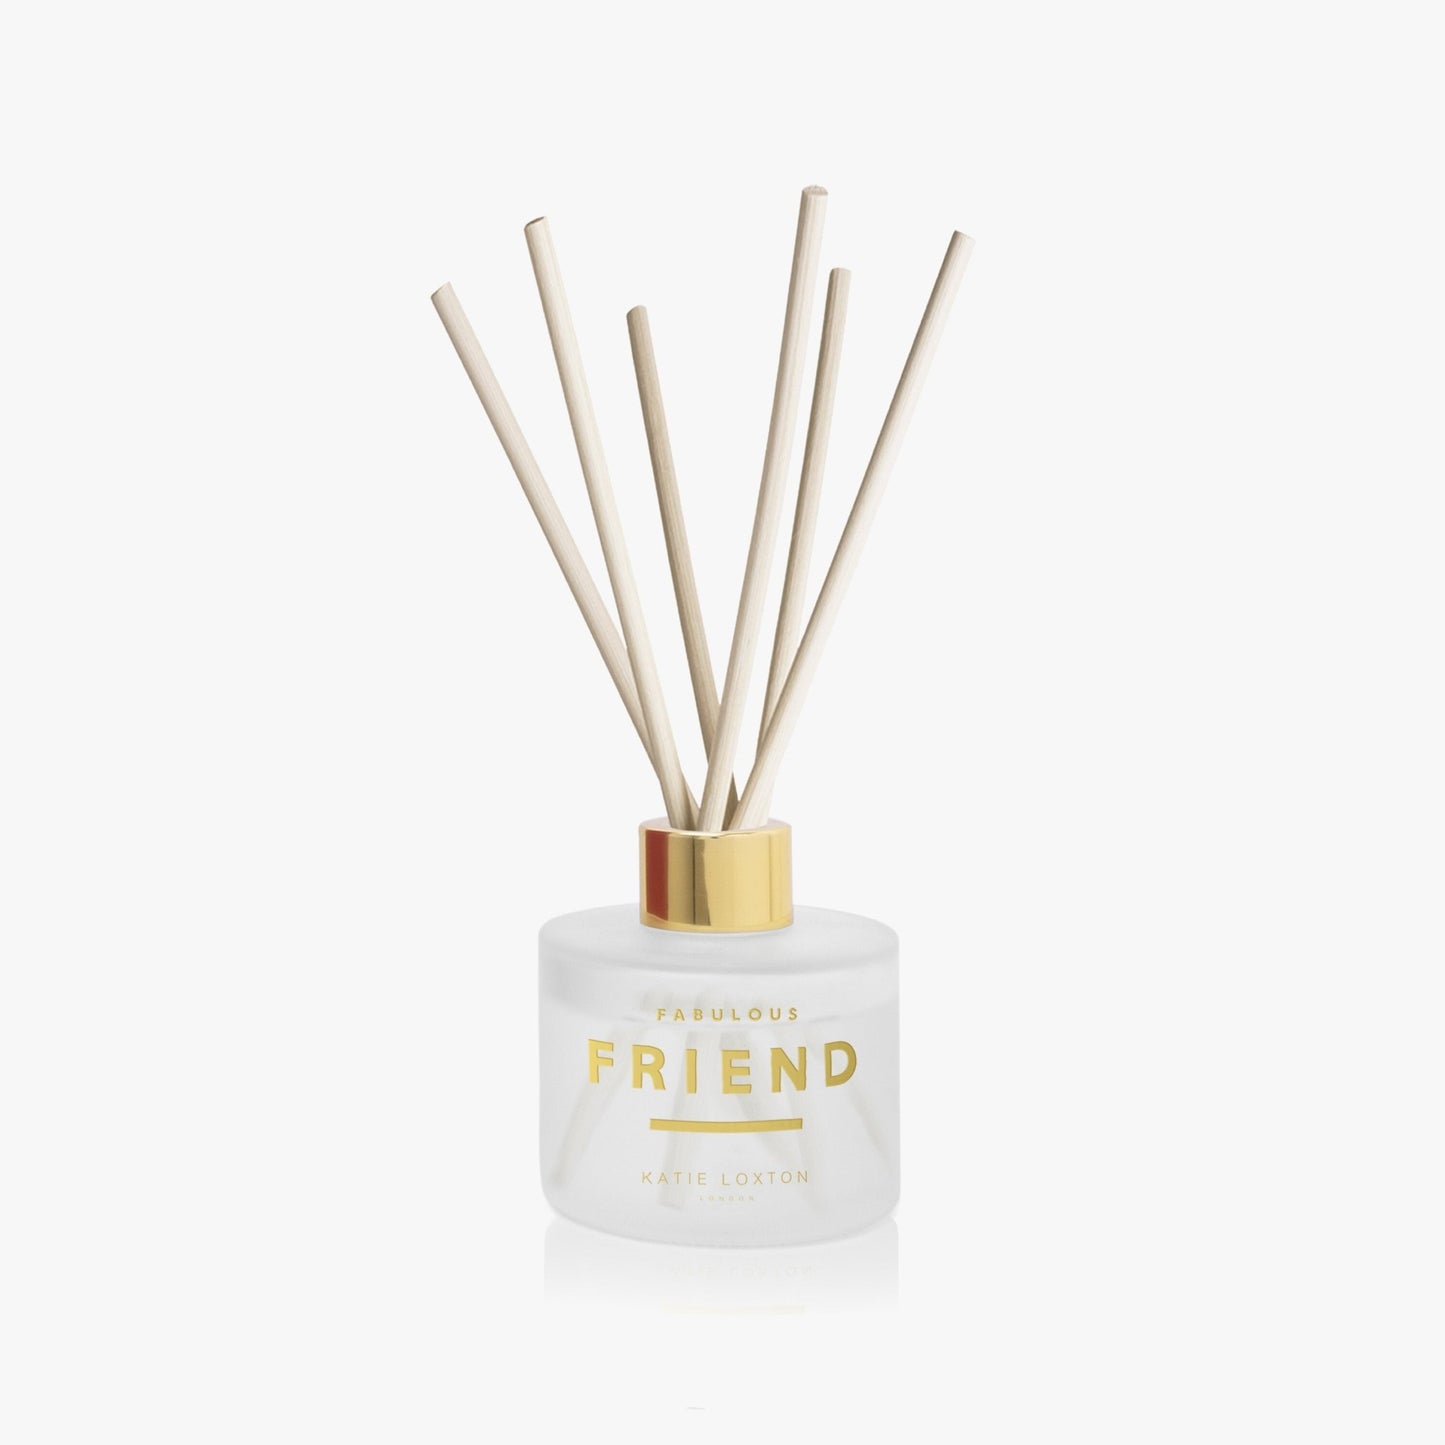 Sweet Papaya And Hibiscus Flower 'Fabulous Friend' Sentiment Reed Diffuser, 3.4 fl. oz